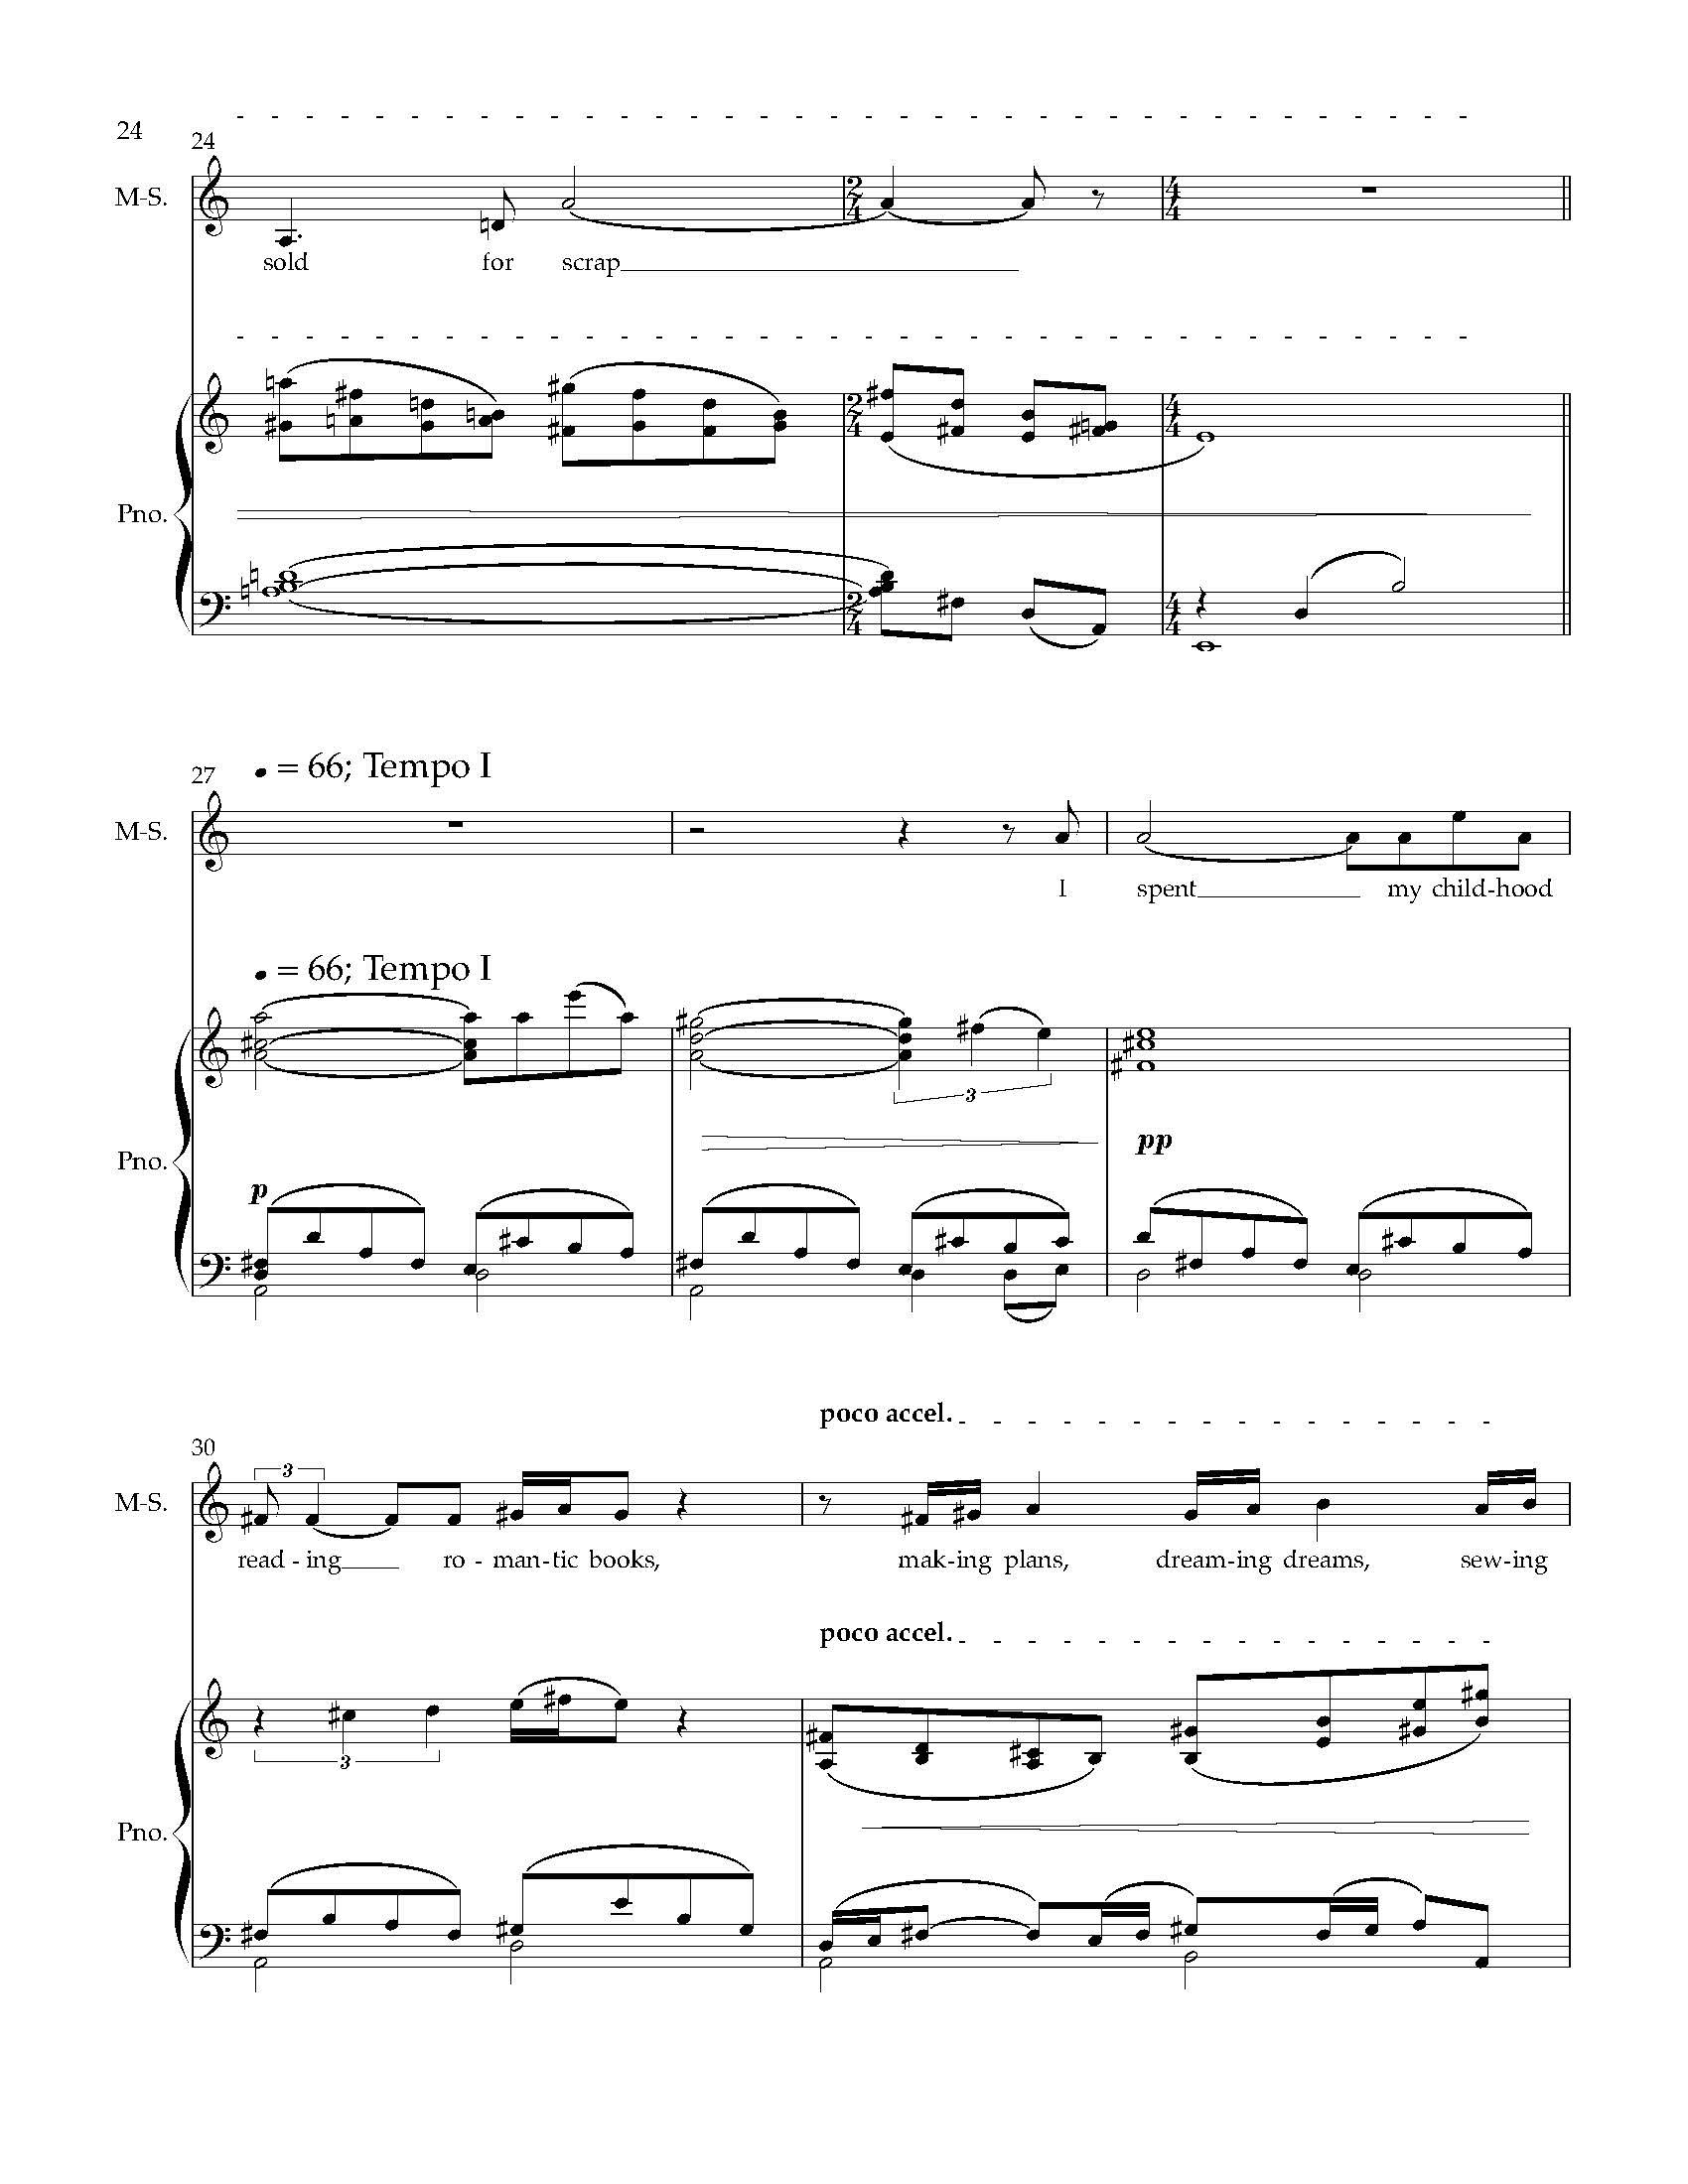 Five Arias from HWGS - Complete Score (1)_Page_28.jpg